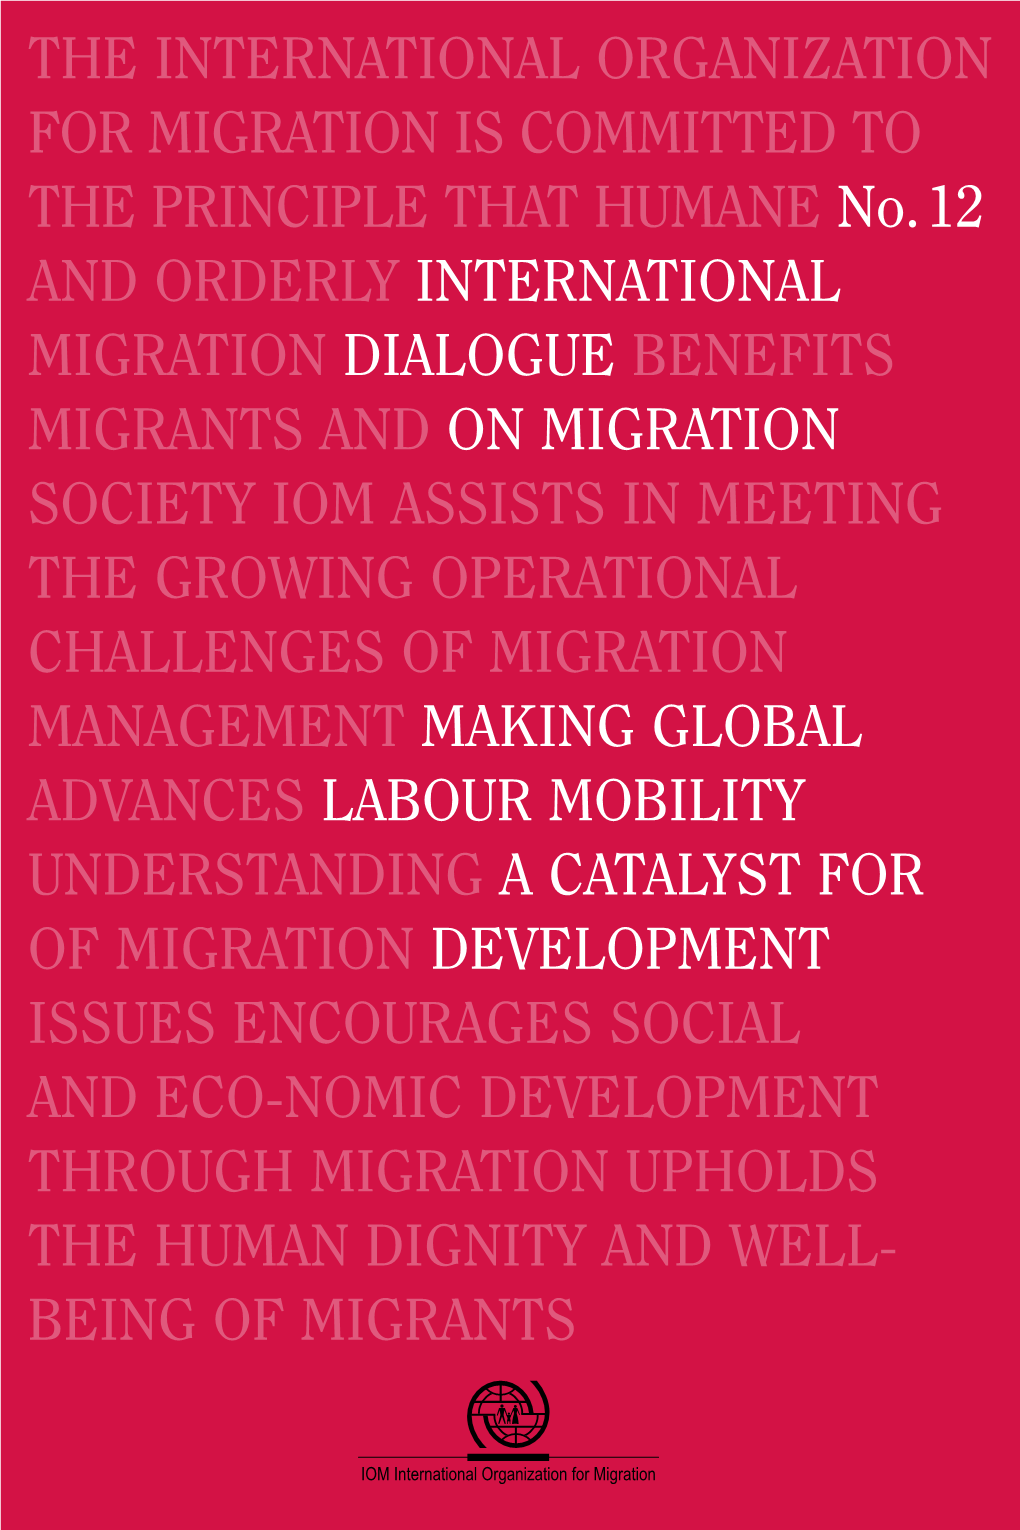 INTERNATIONAL DIALOGUE on MIGRATION This Book Is Published by the Migration Policy and Research Department (MPR) of the International Organization for Migration